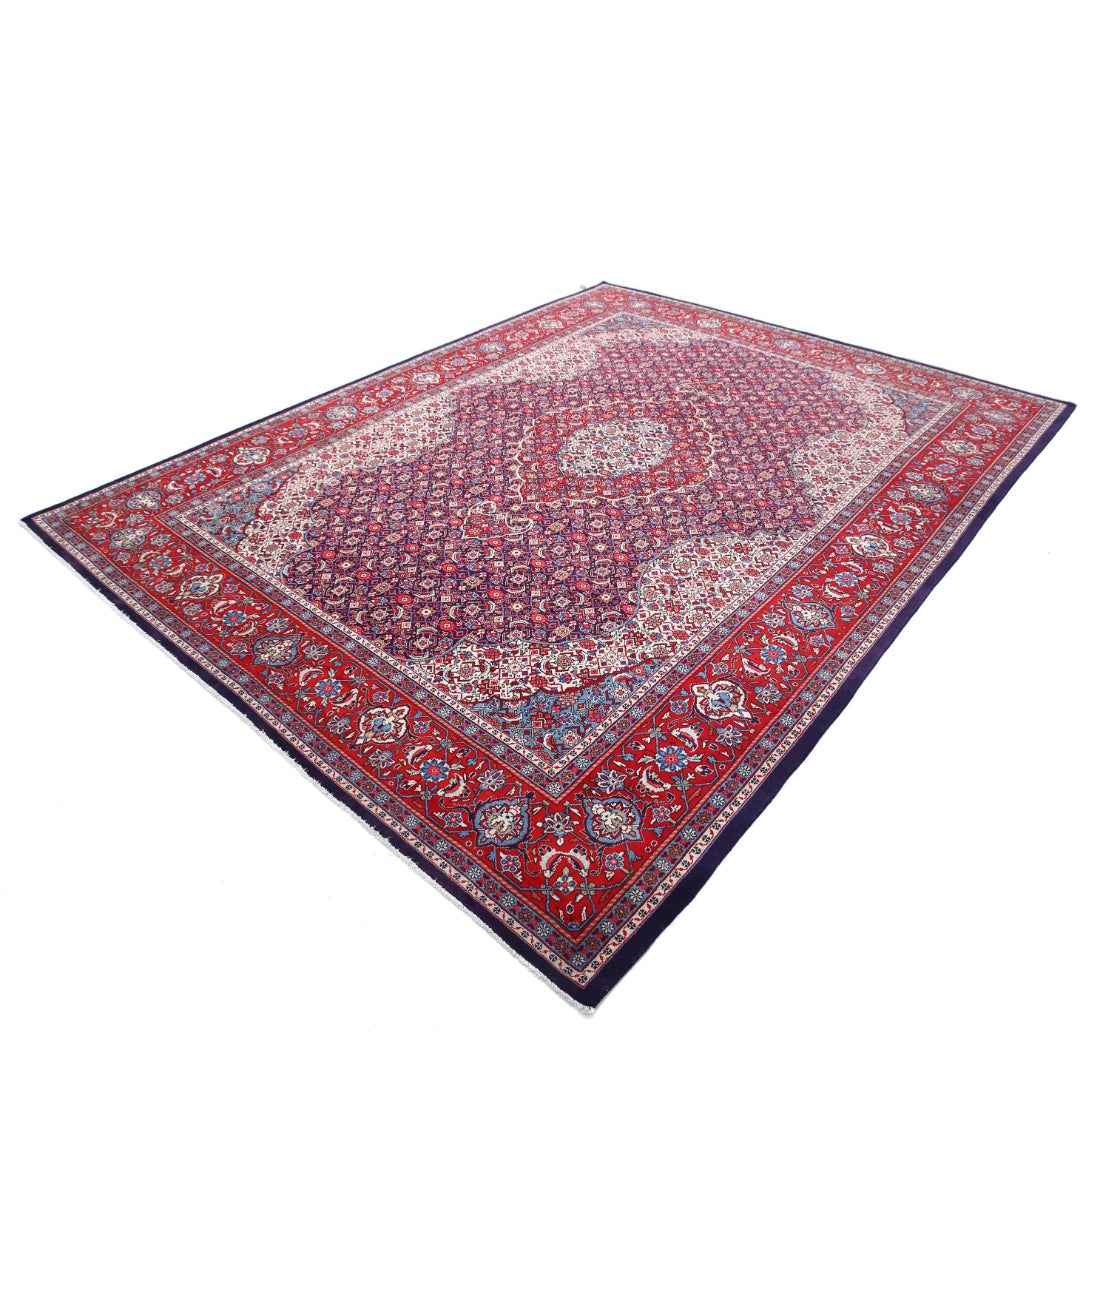 Hand Knotted Persian Tabriz Wool Rug - 8'0'' x 10'4'' 8'0'' x 10'4'' (240 X 310) / Blue / Red